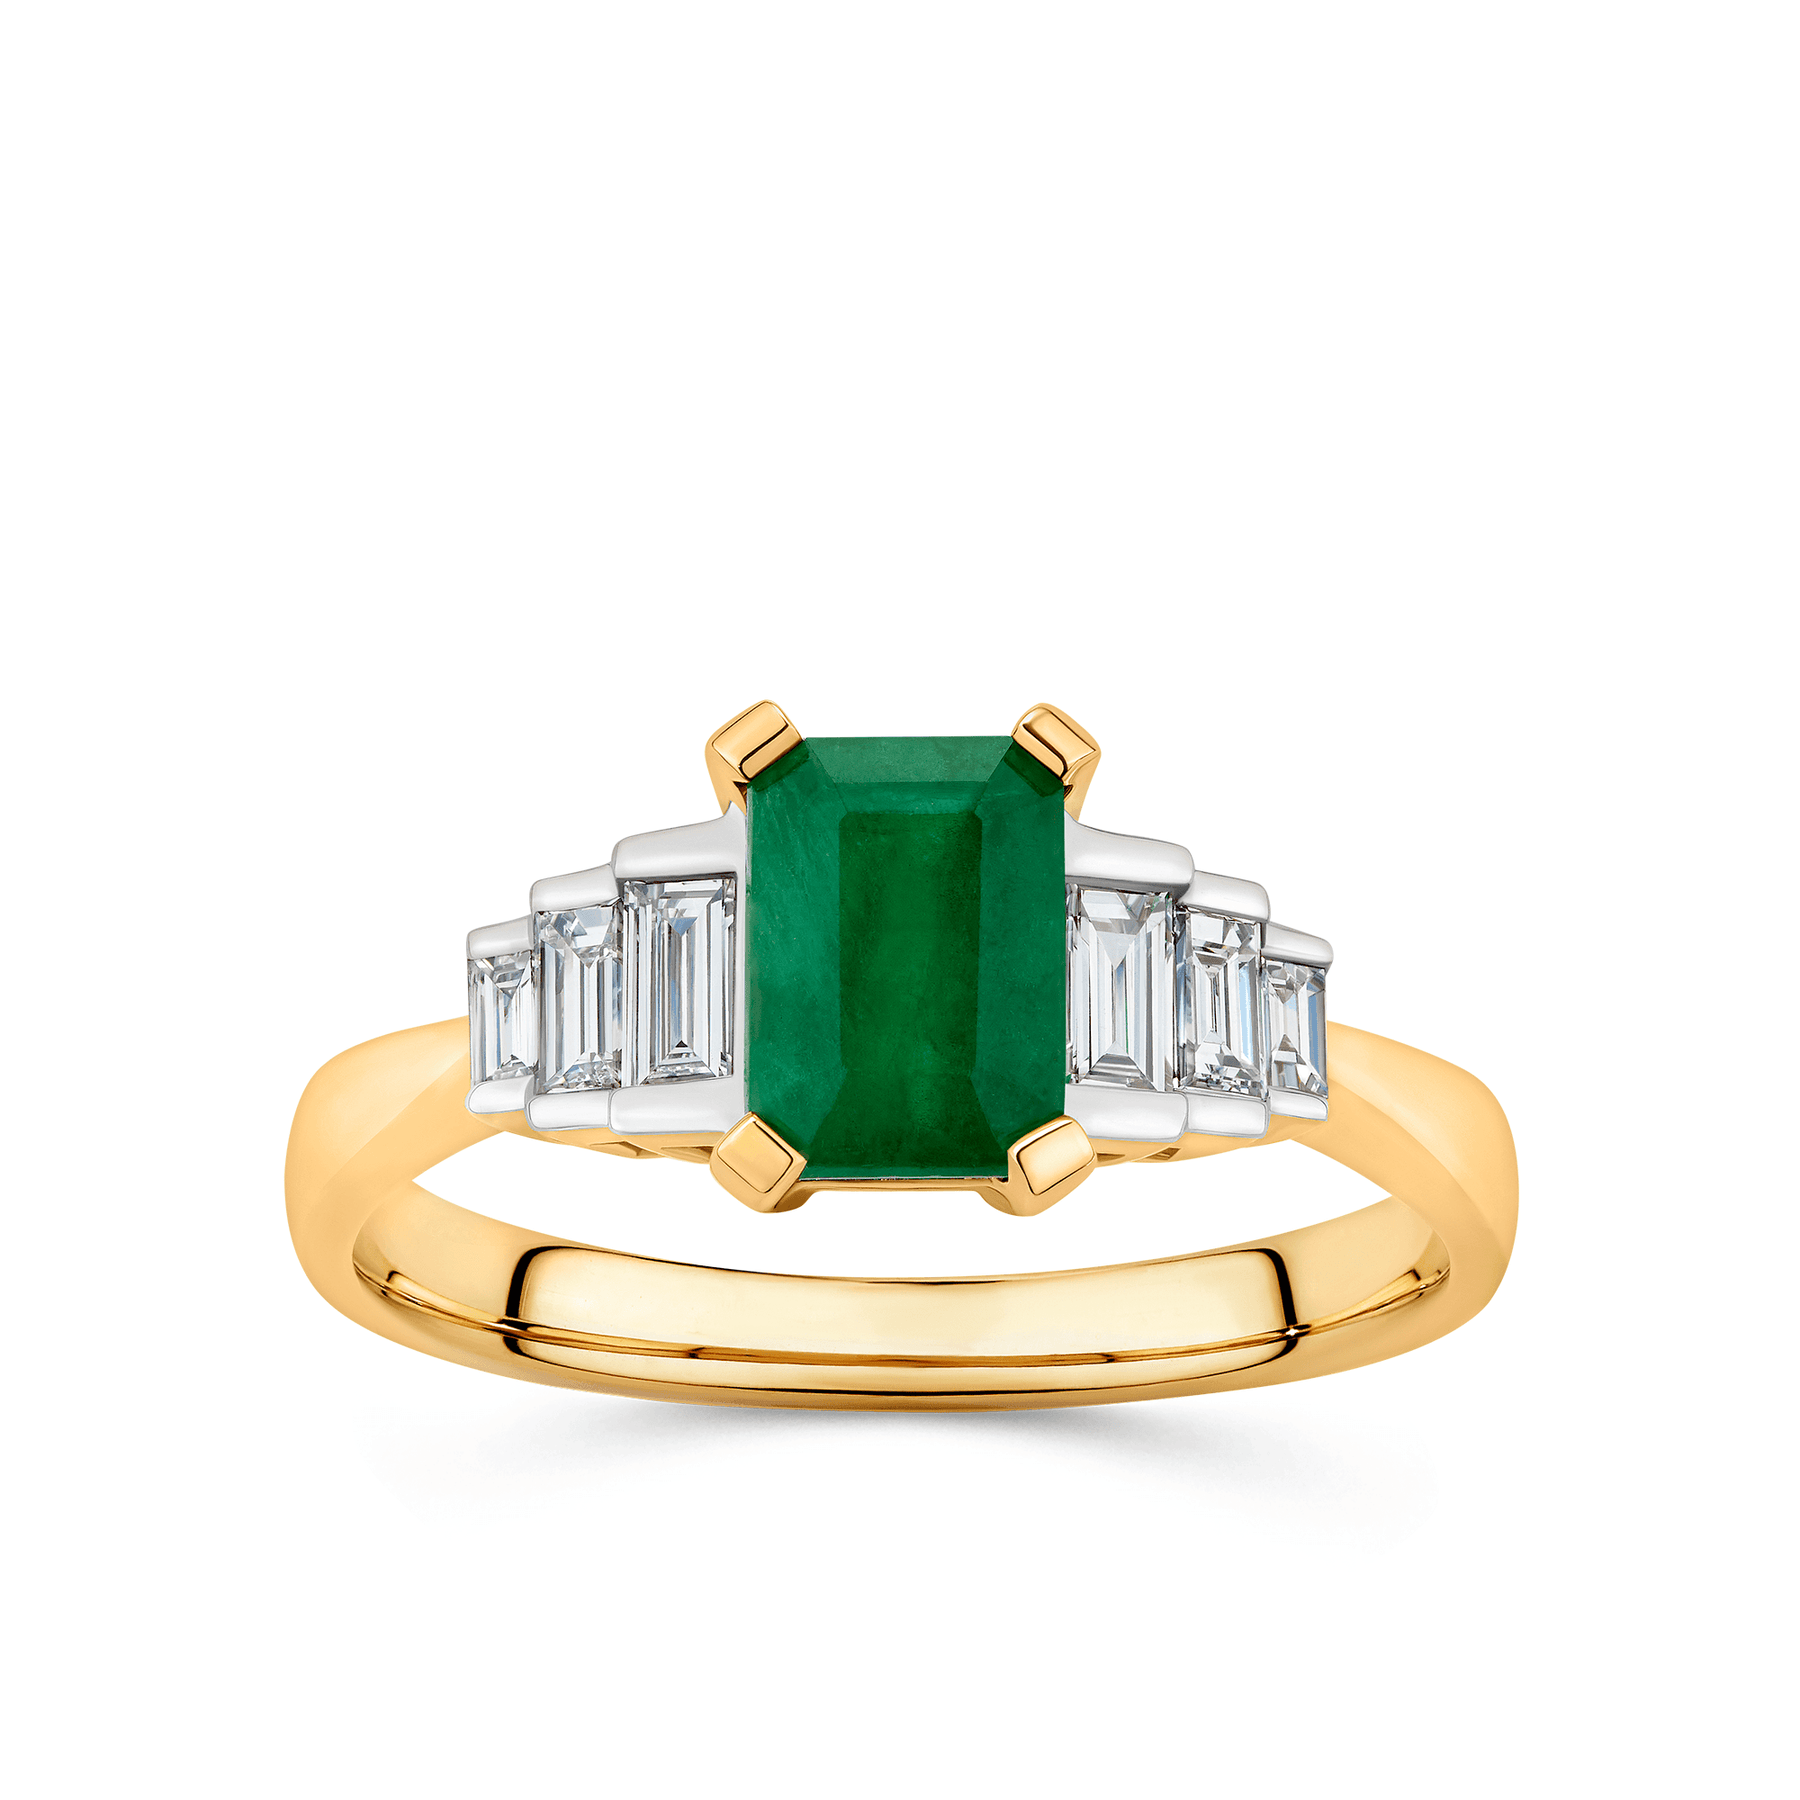 Emerald and Diamond Claw & Channel Set Ring in 9ct Yellow Gold - Wallace Bishop